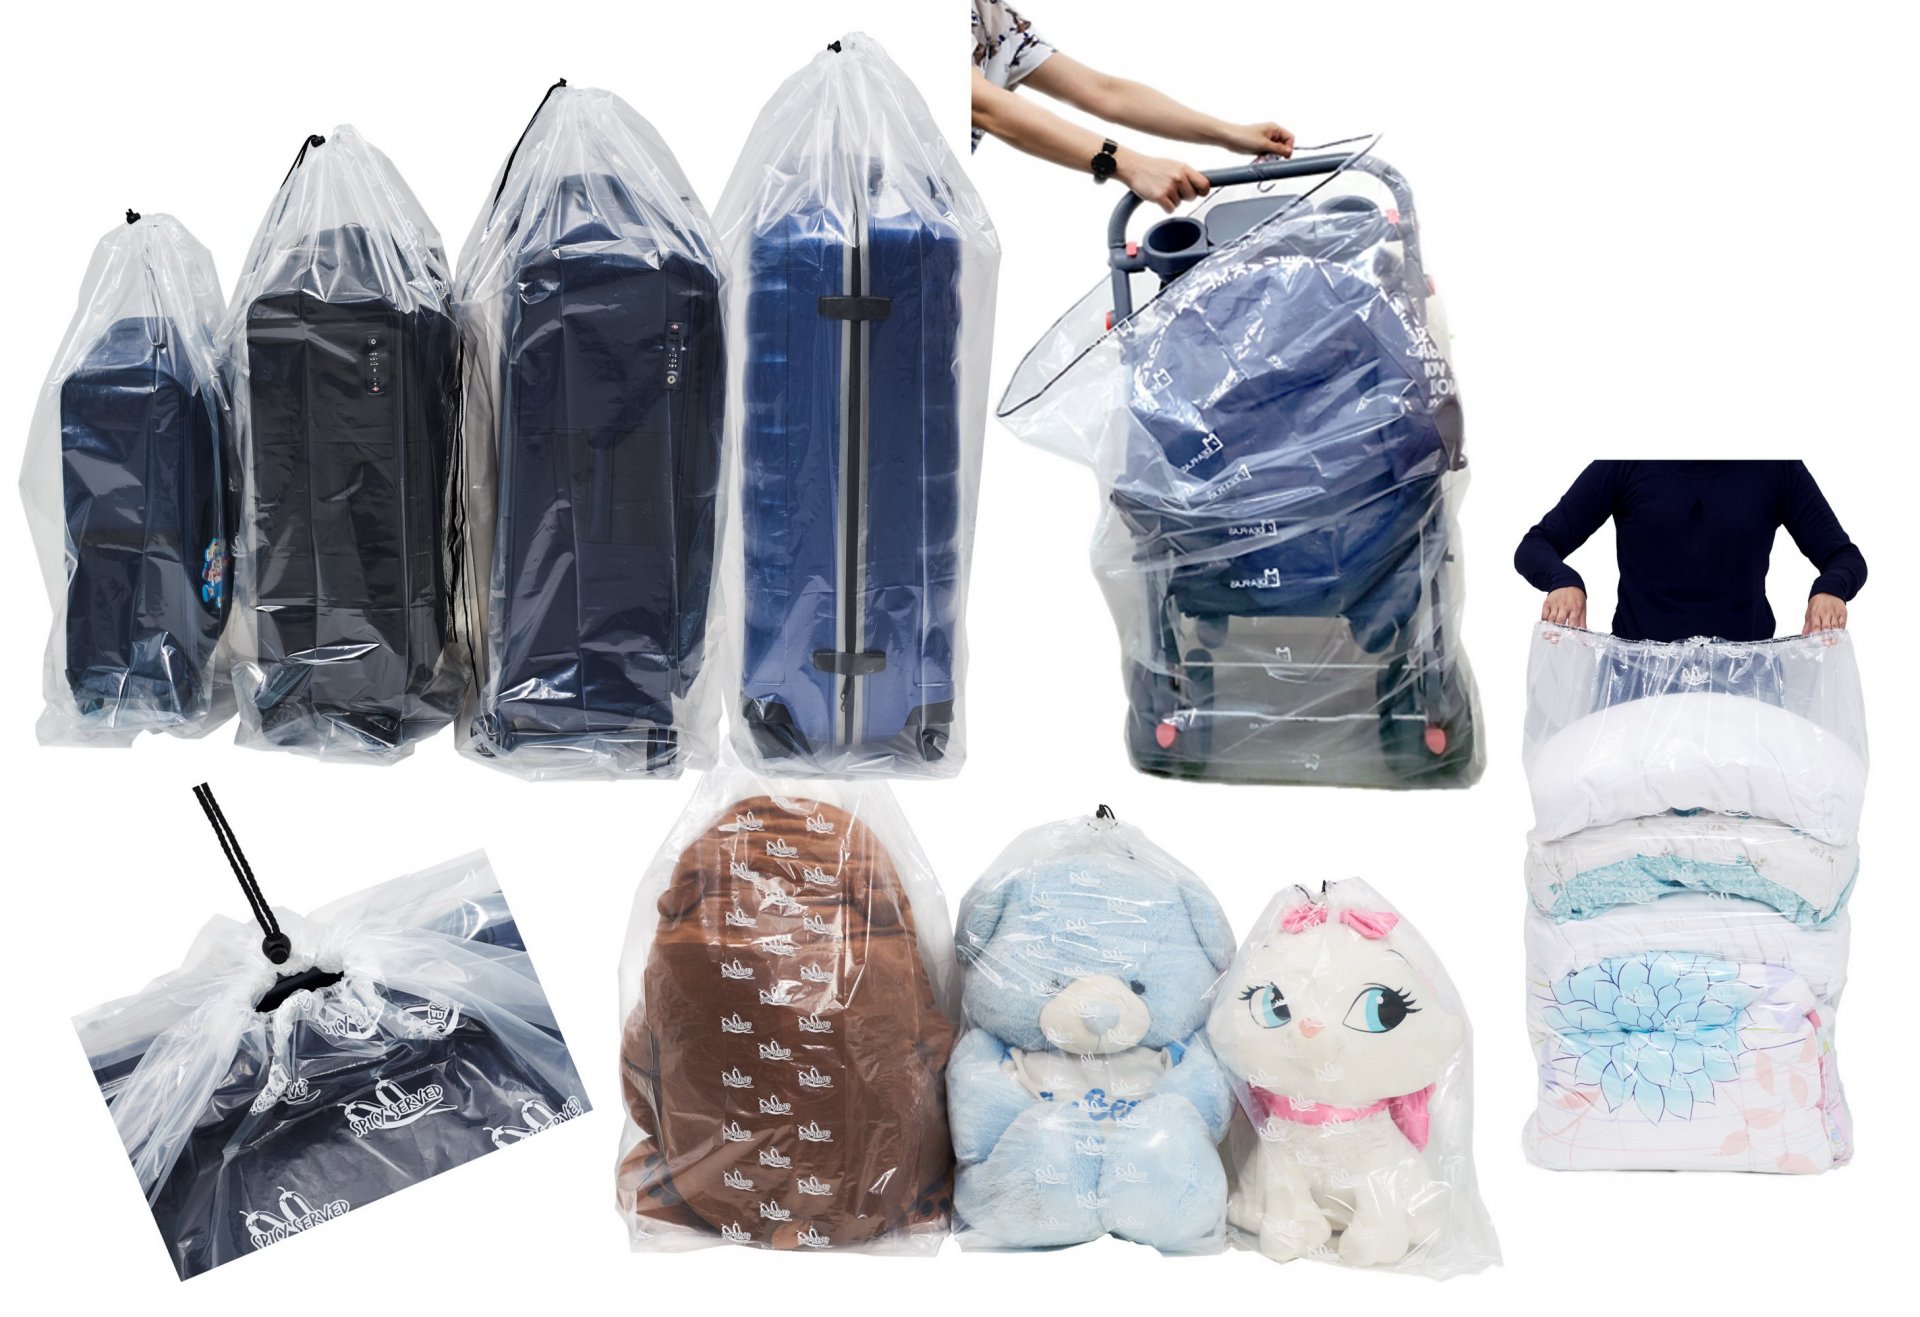 Dust Cover Big Plastic Drawstring Bags Multi-Purpose for Storage and  Keeping Luggage, Big Dolls, Blankets, Pillows, Suitcase Good for Household